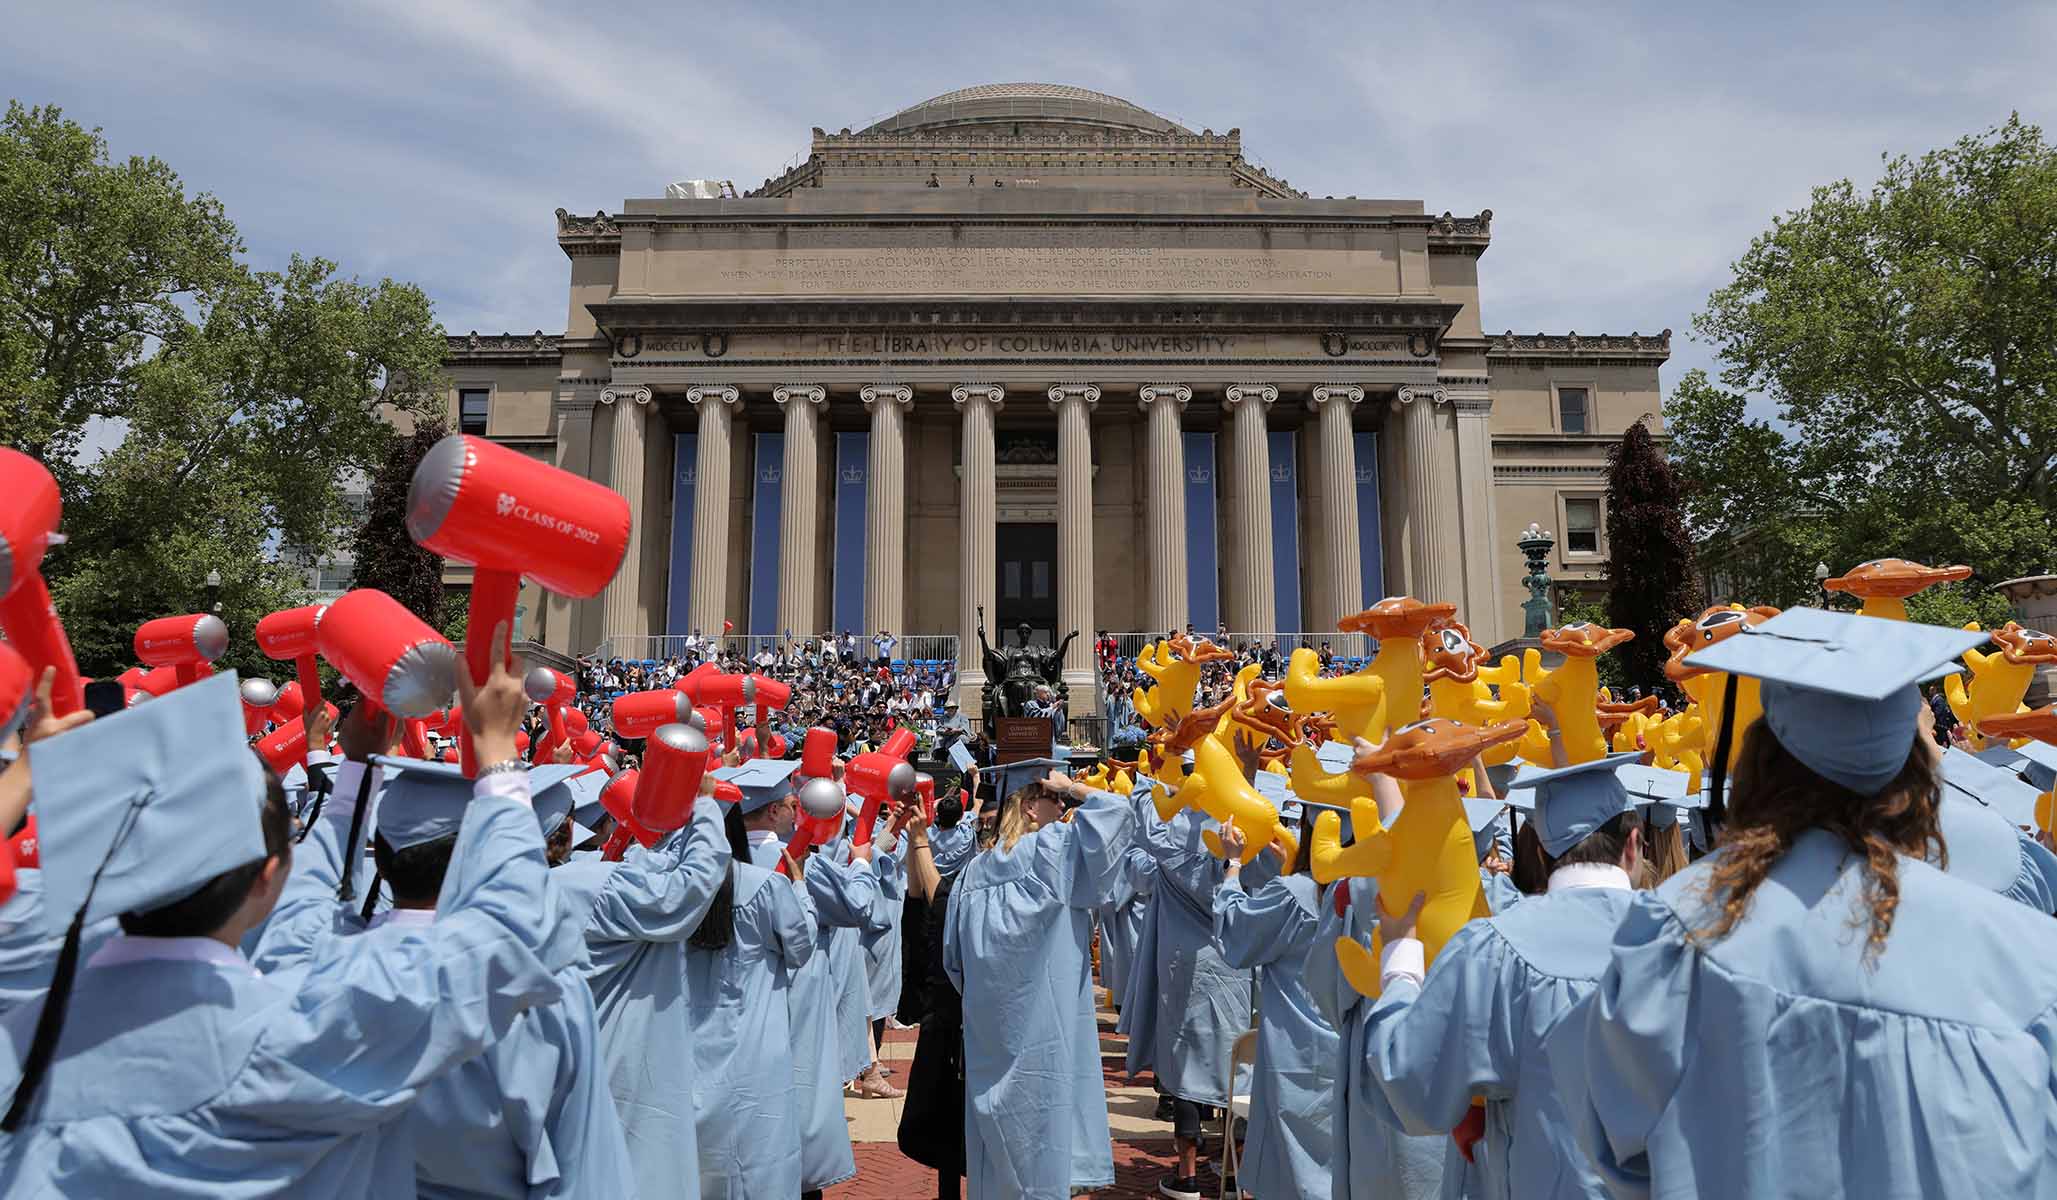 Columbia UPenn among Worst Colleges for Free Speech Report Finds 